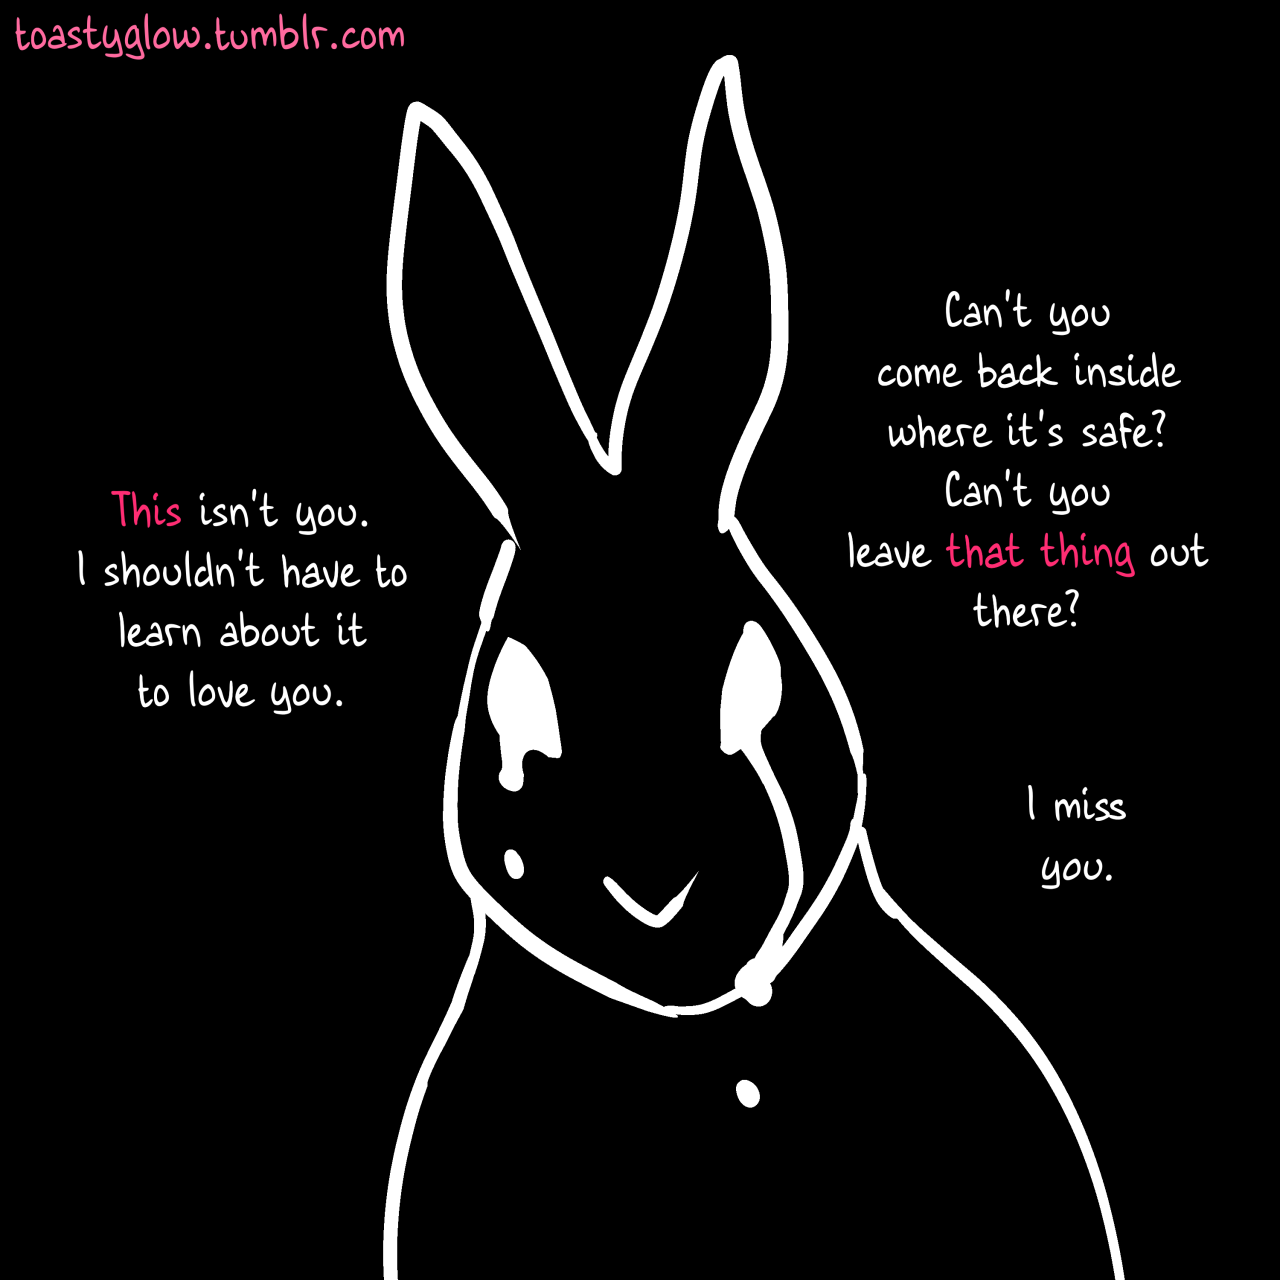 Close on the larger rabbit, who is weeping.  "This isn't you," it says.  The text of "this" is pink.  "I shouldn't have to learn about it to love you.  Can't you come back inside where it's safe?  Can't you leave that thing out there?  I miss you."